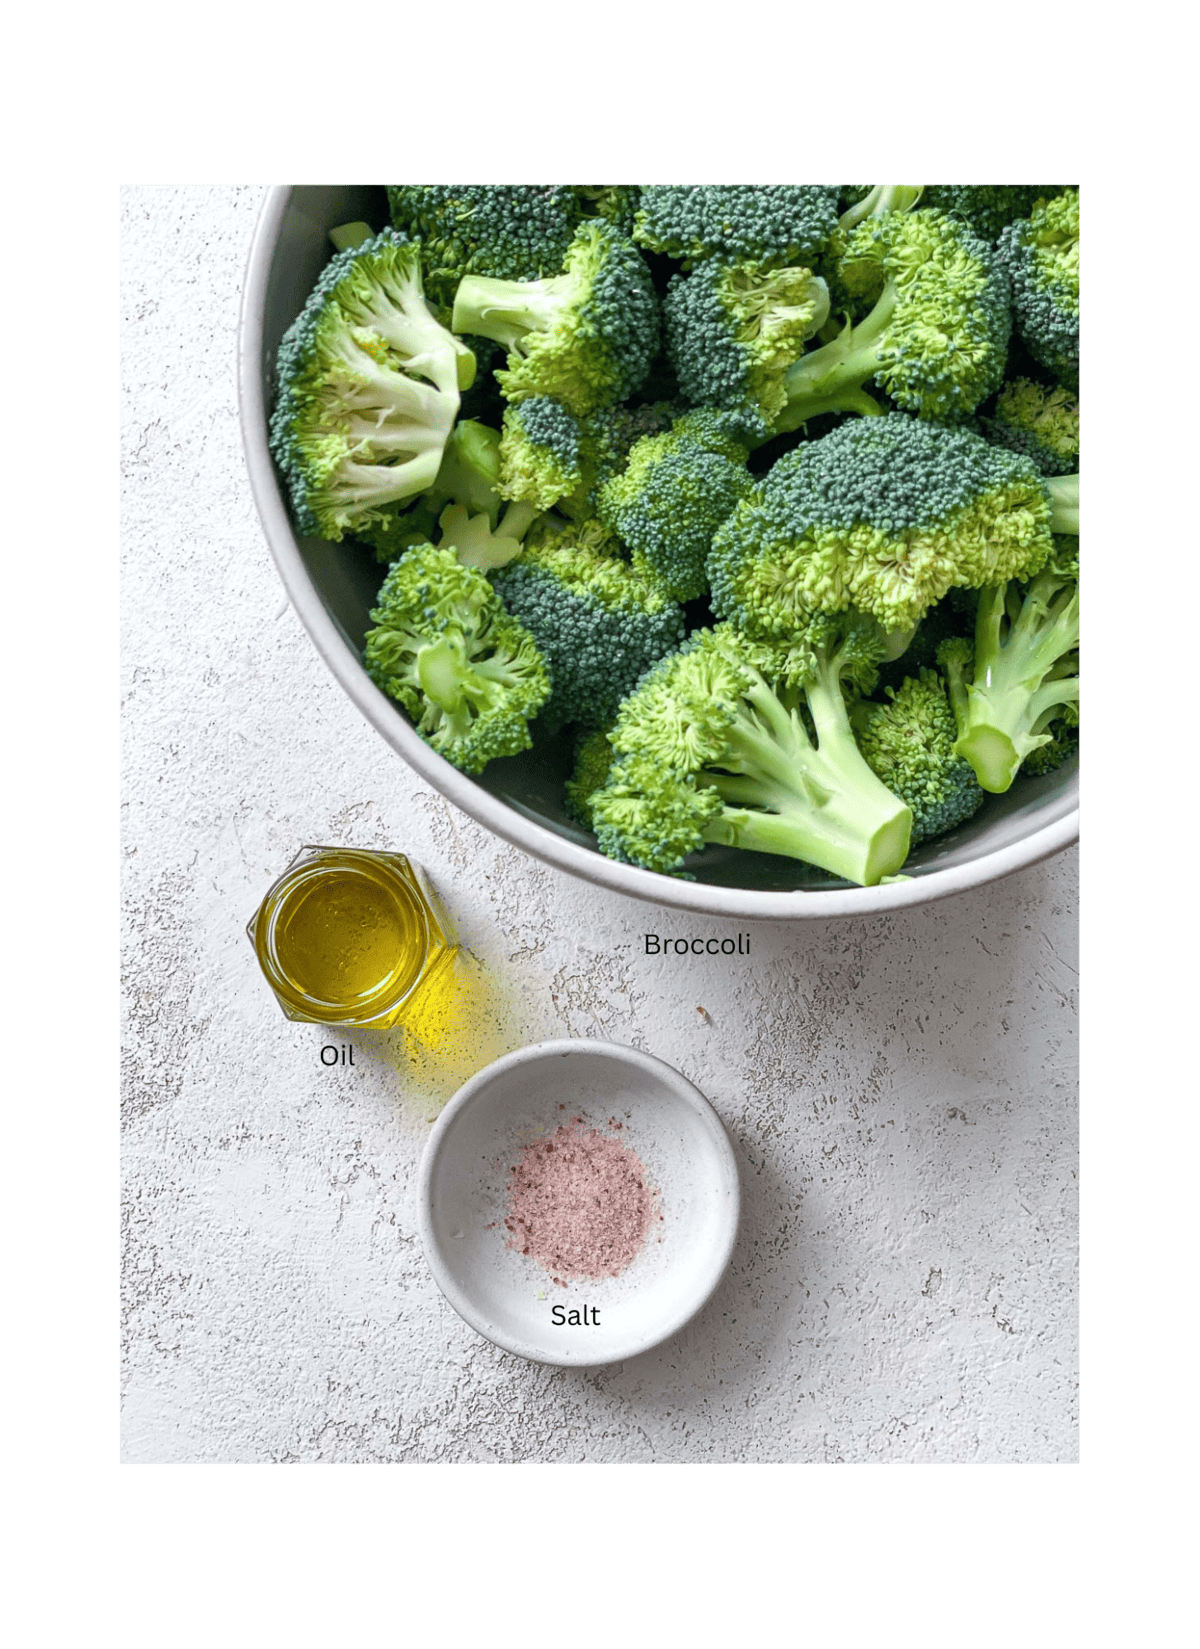 ingredients for Oven Charred Broccoli measured out on a white surface